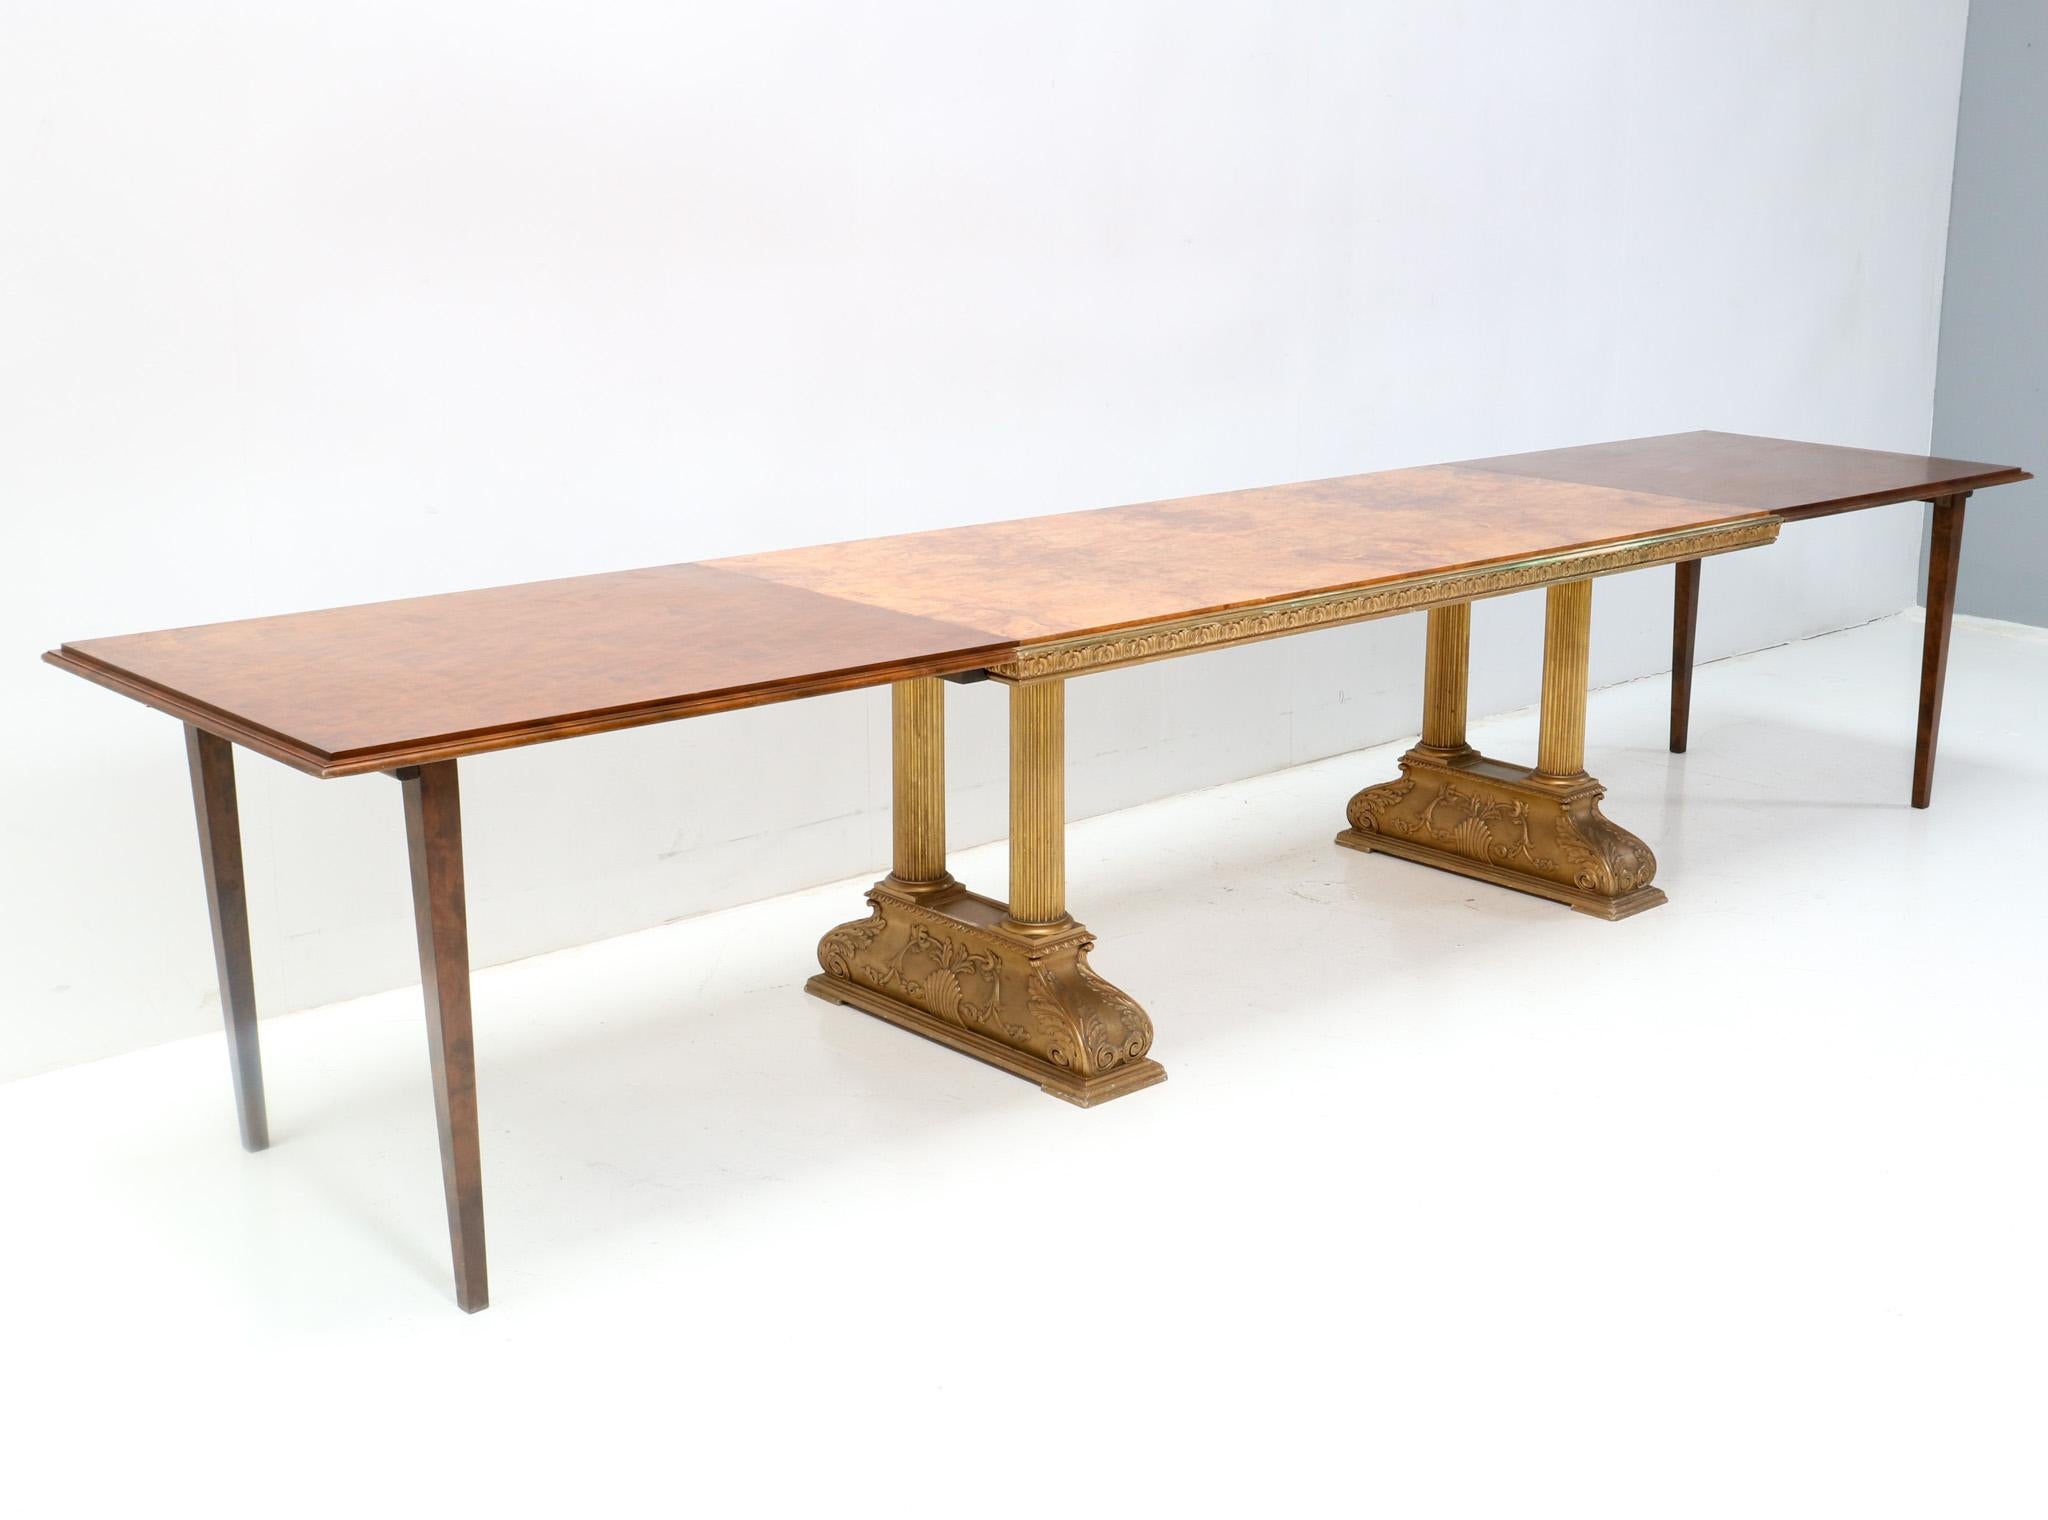 Magnificent and rare  Ceasar dining room table.
Design by Axel Einar Hjorth for NK Nordiska Kompaniet.
Striking Swedish design from the 1920s.
Original gilt birch base with hand-carved decoration.
The top is original veneered with burl walnut